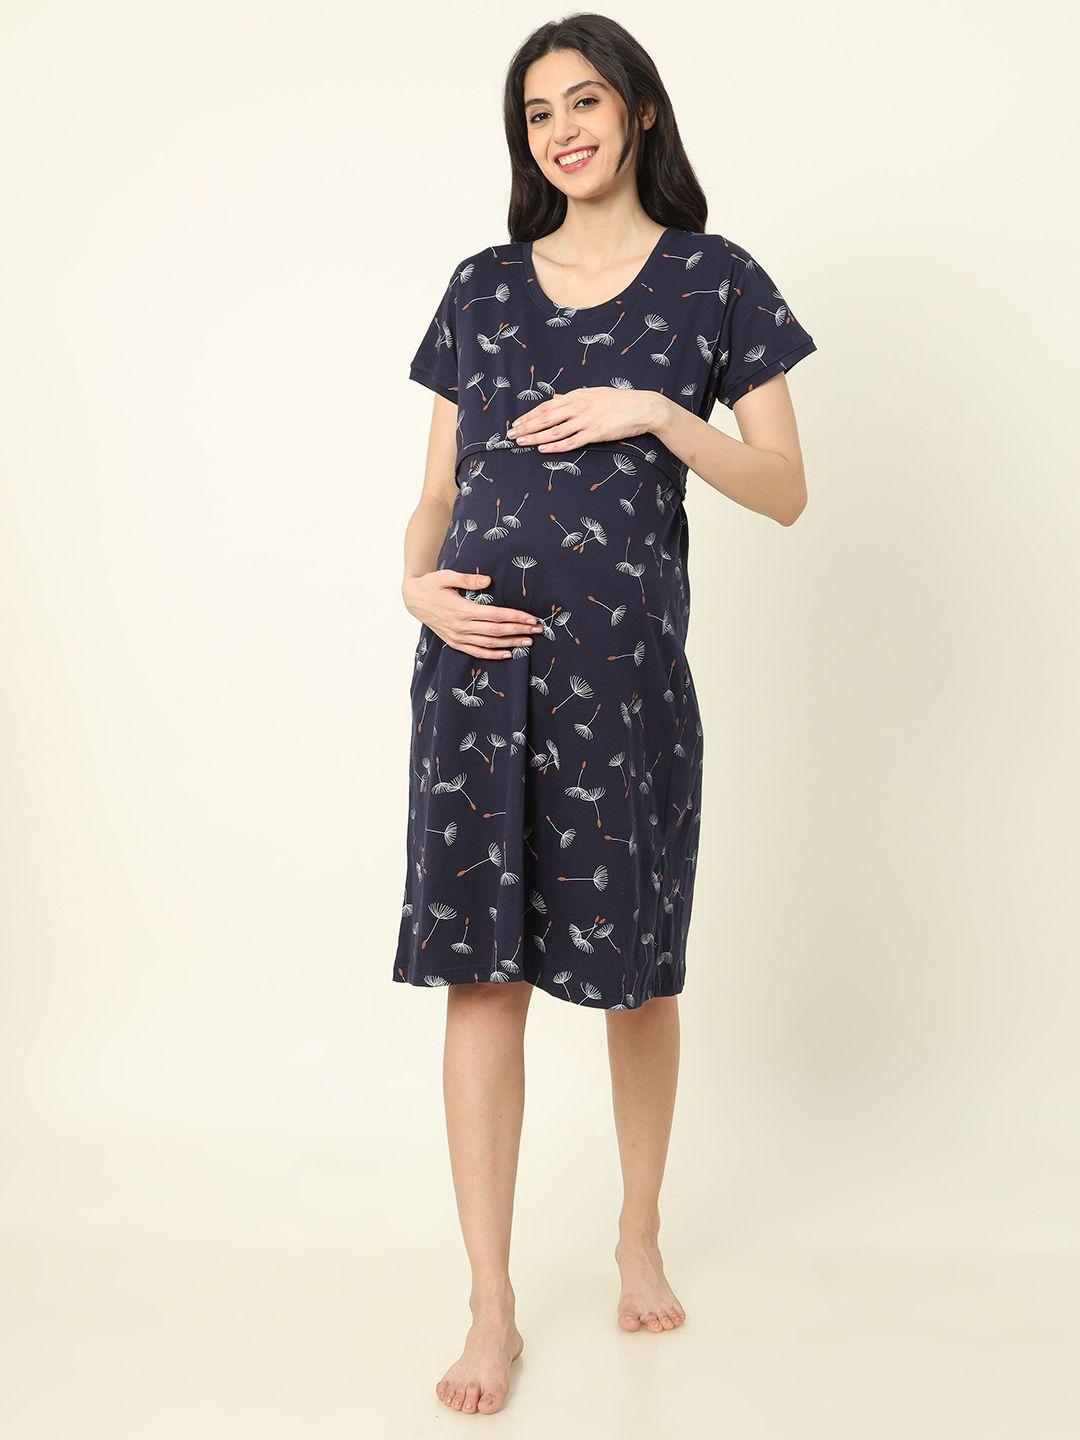 9shines label floral printed pure cotton maternity nightdress